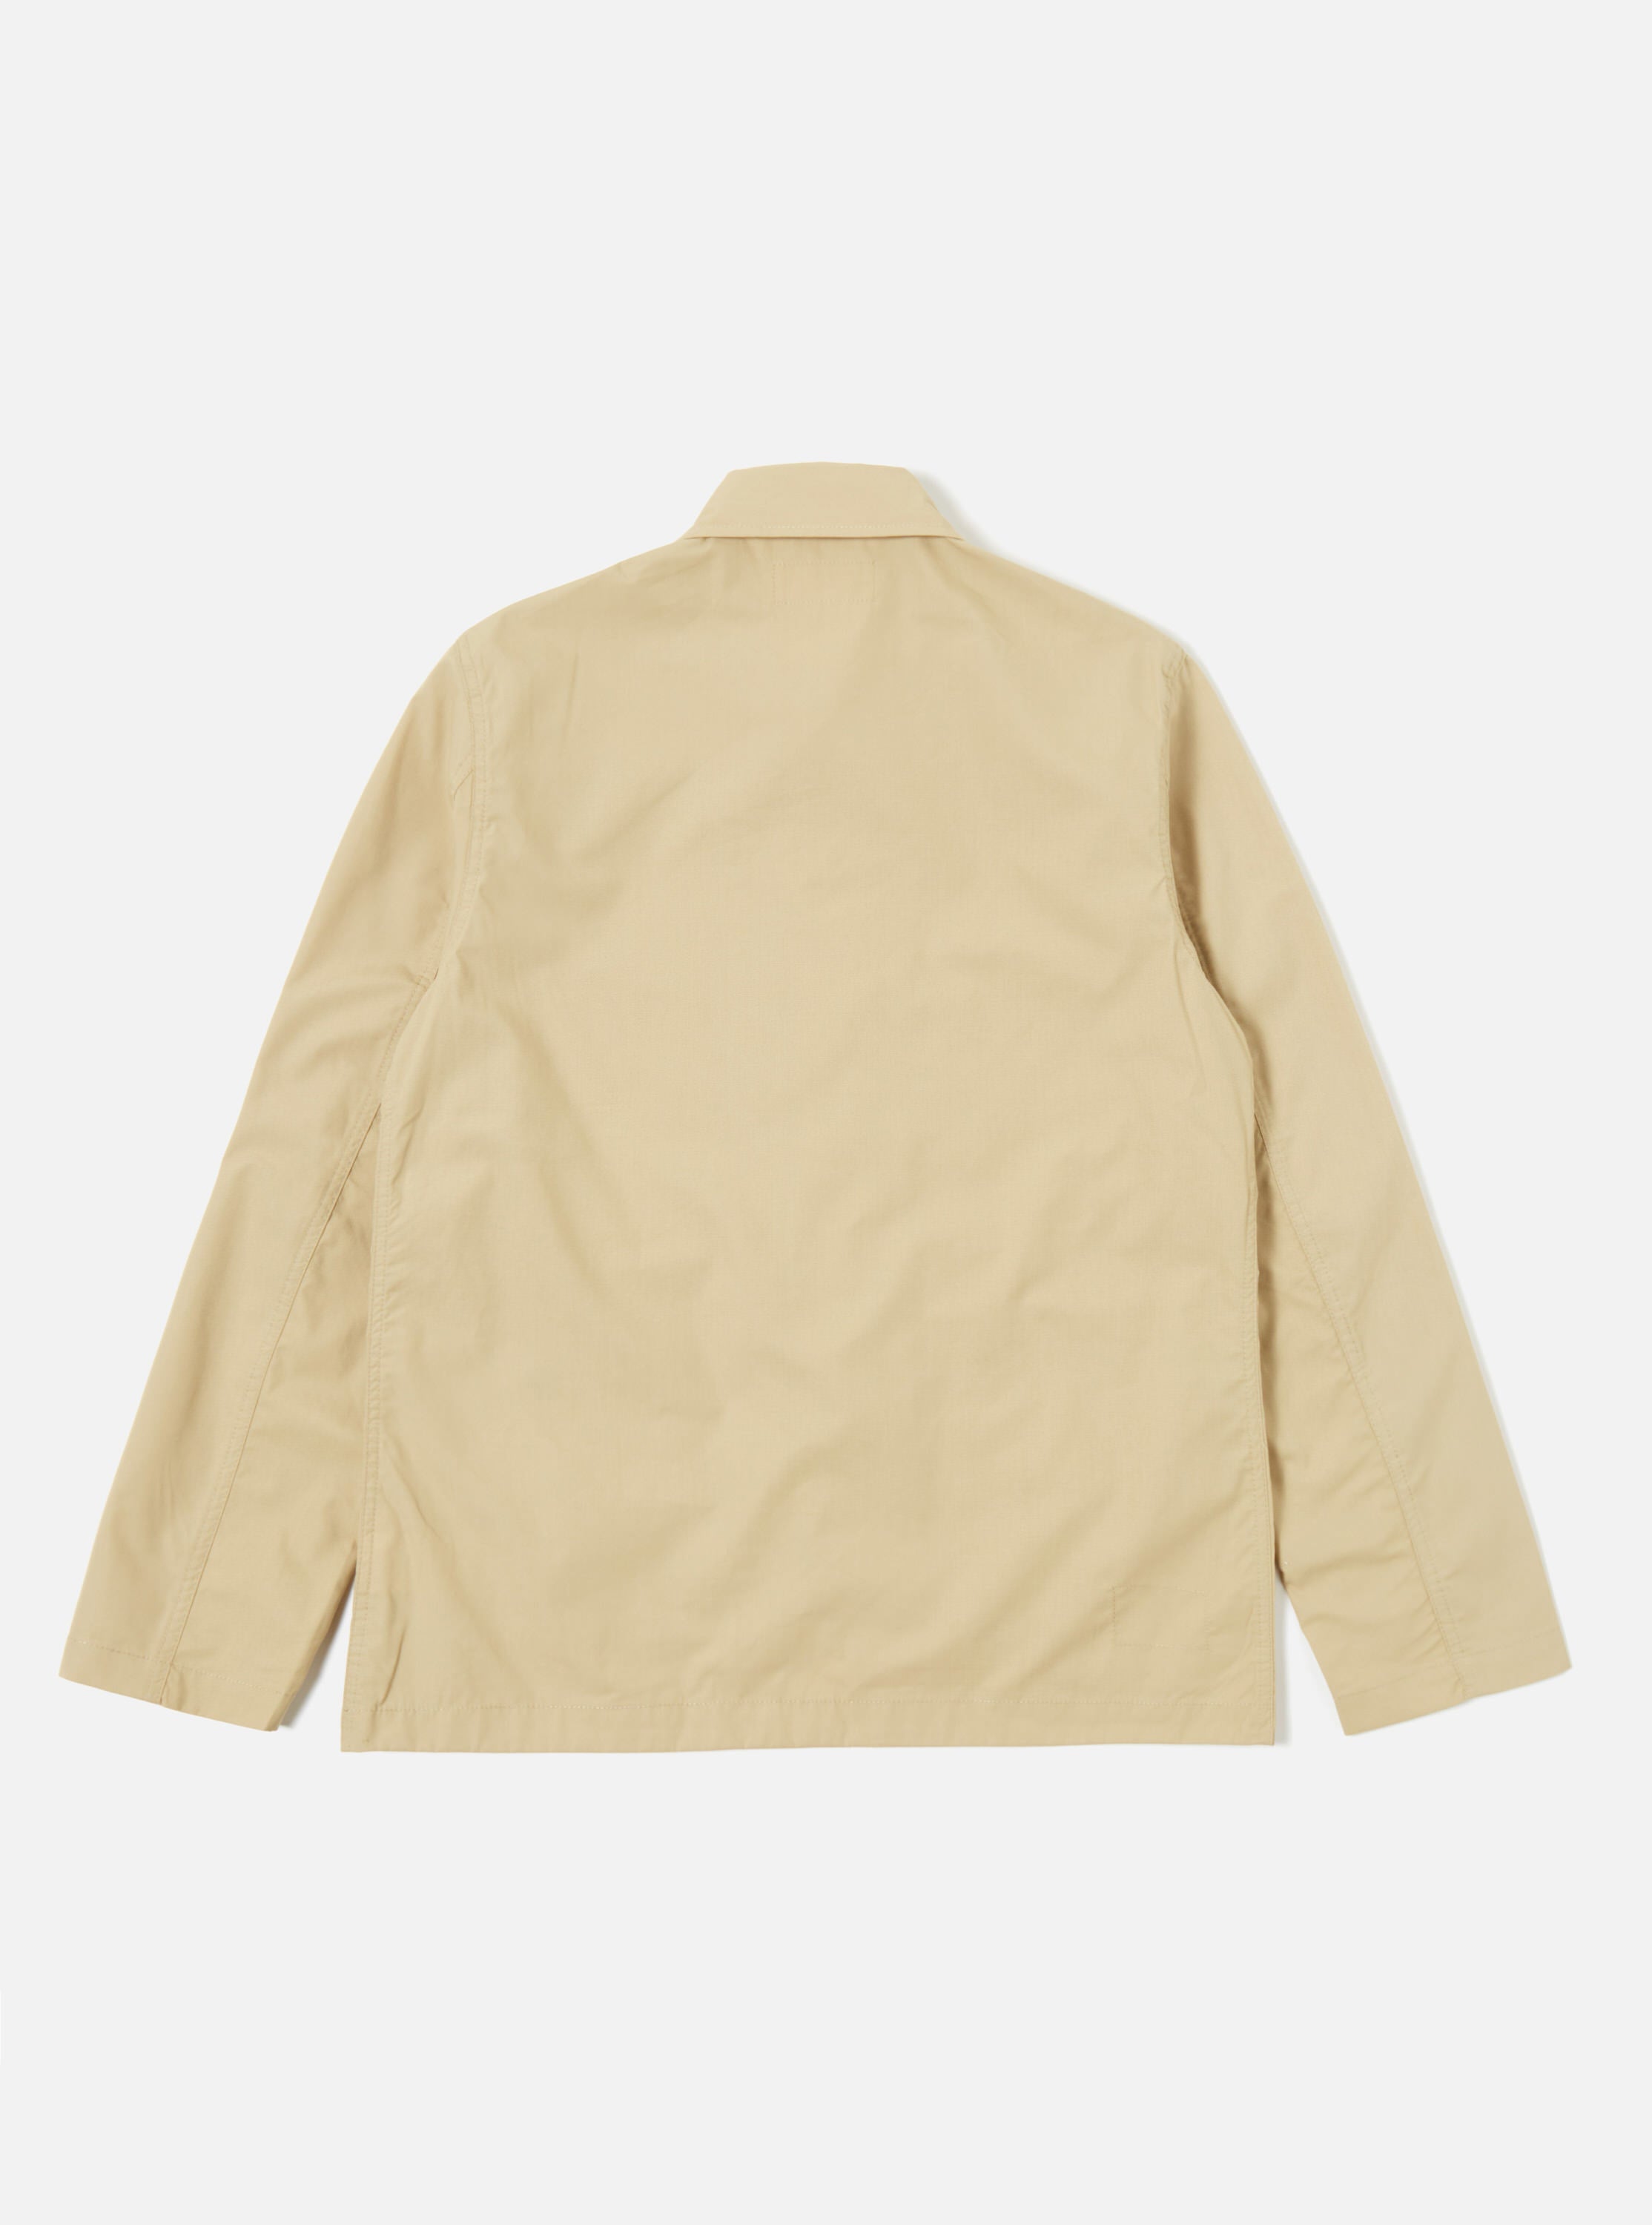 Universal Works Bakers Jacket in Sand Recycled Poly Tech